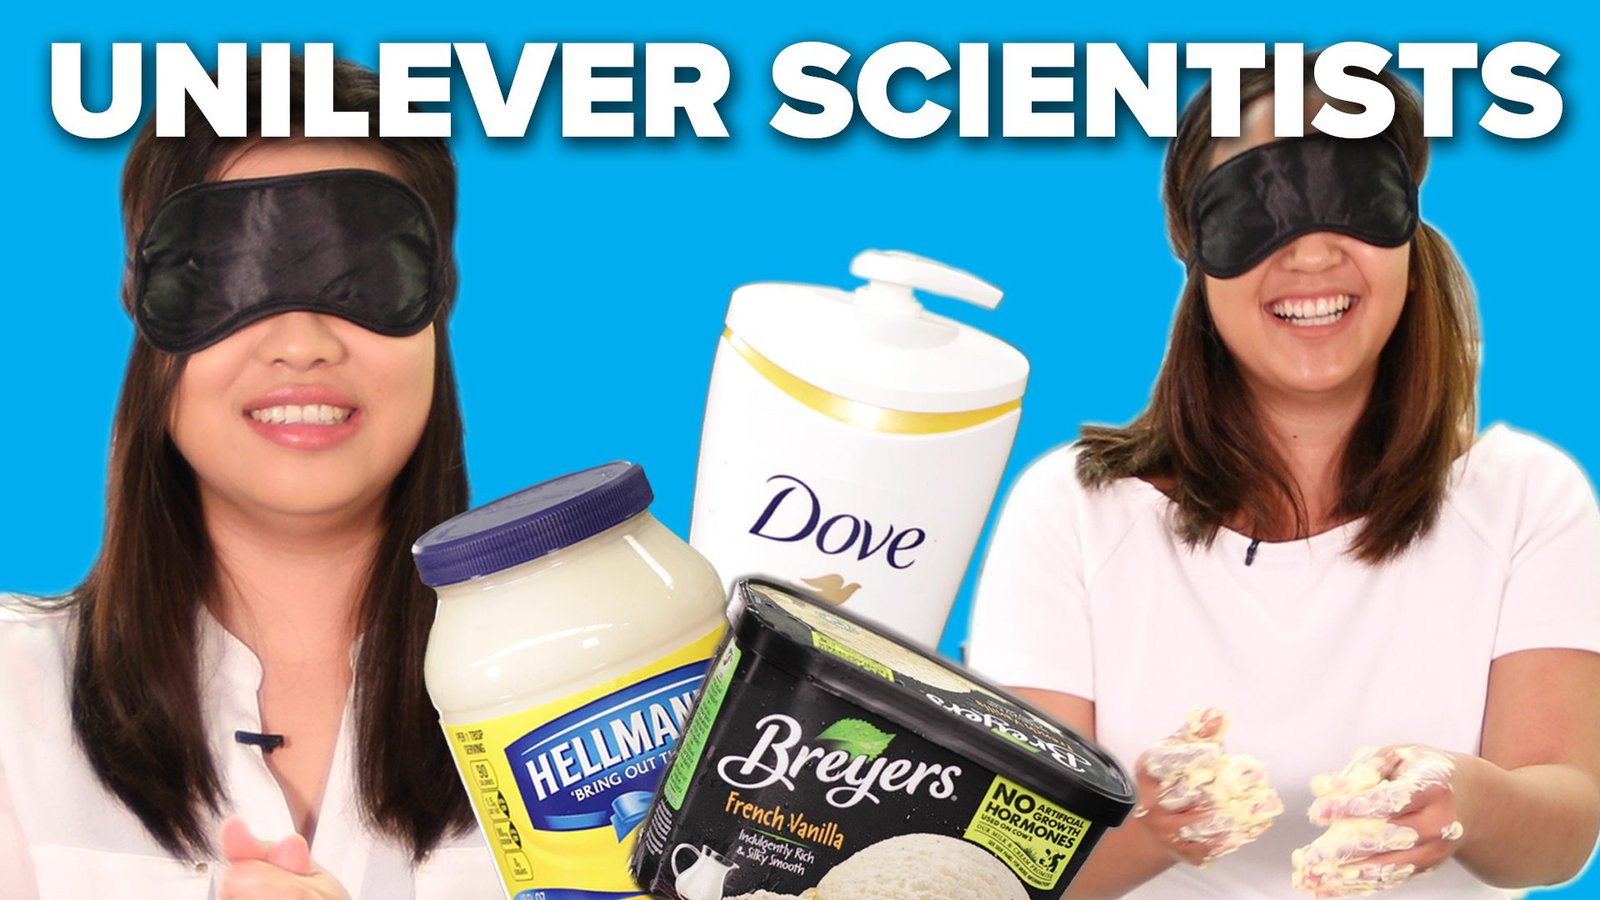 Video: Unilever Scientists Guess Their Products | Job and Internship Advice, Companies to Work for and More #Video #Unilever #Scientists #Guess #Products #Job #Internship #Advice #Companies #Work